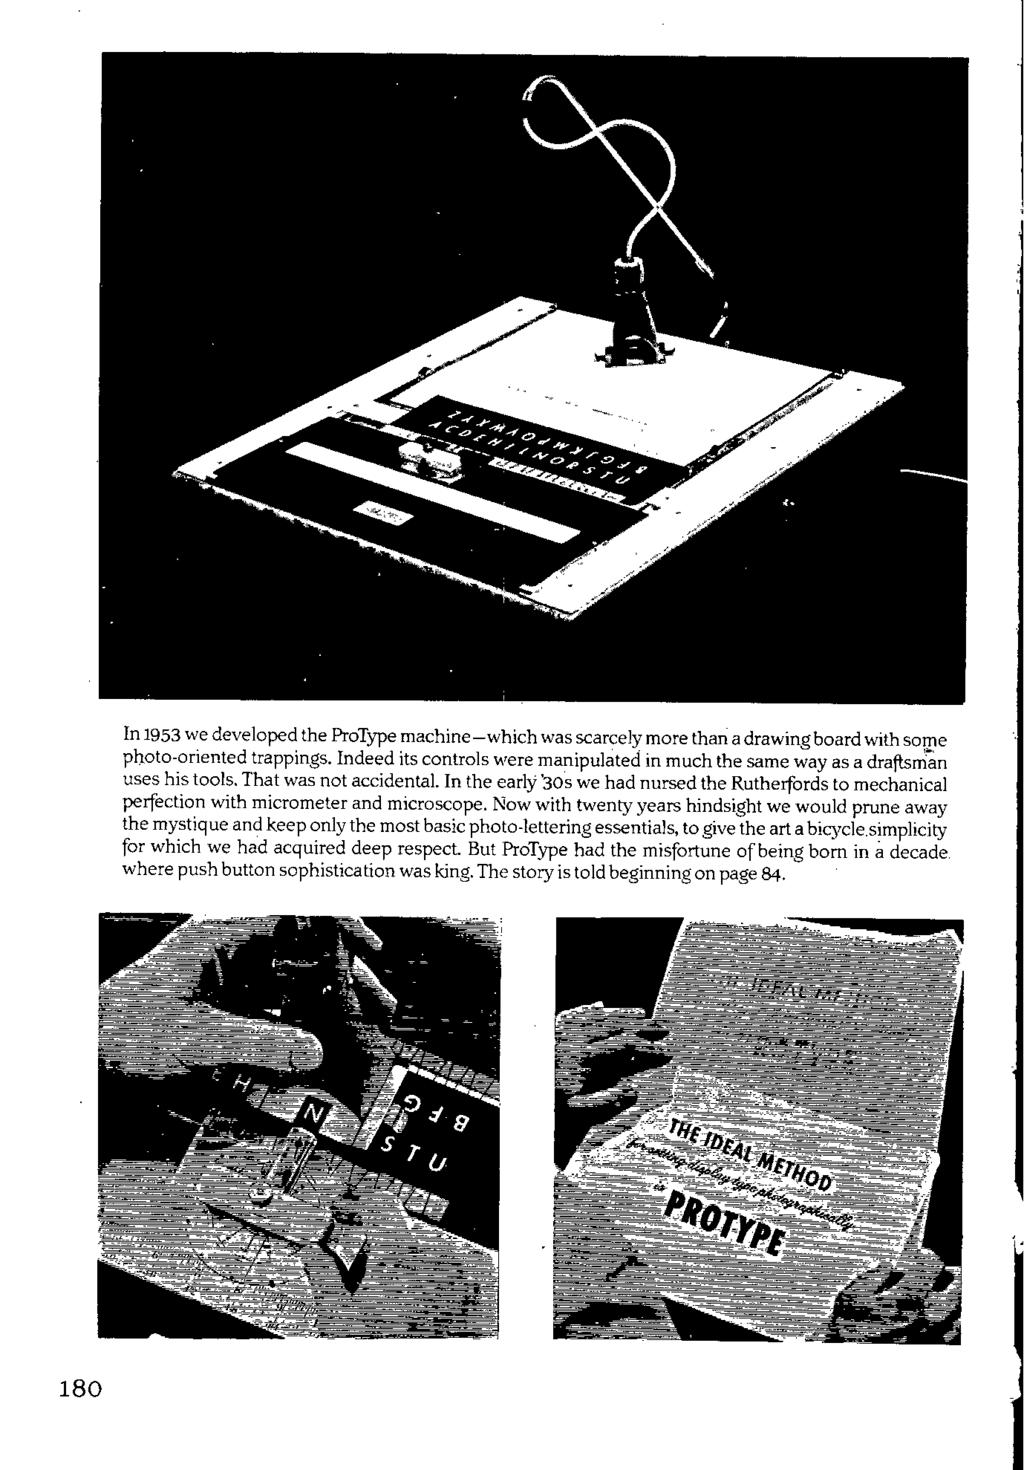 180 In 1953 we developed the ProType machine which was scarcelymore than a drawing board with some photo-oriented trappings.